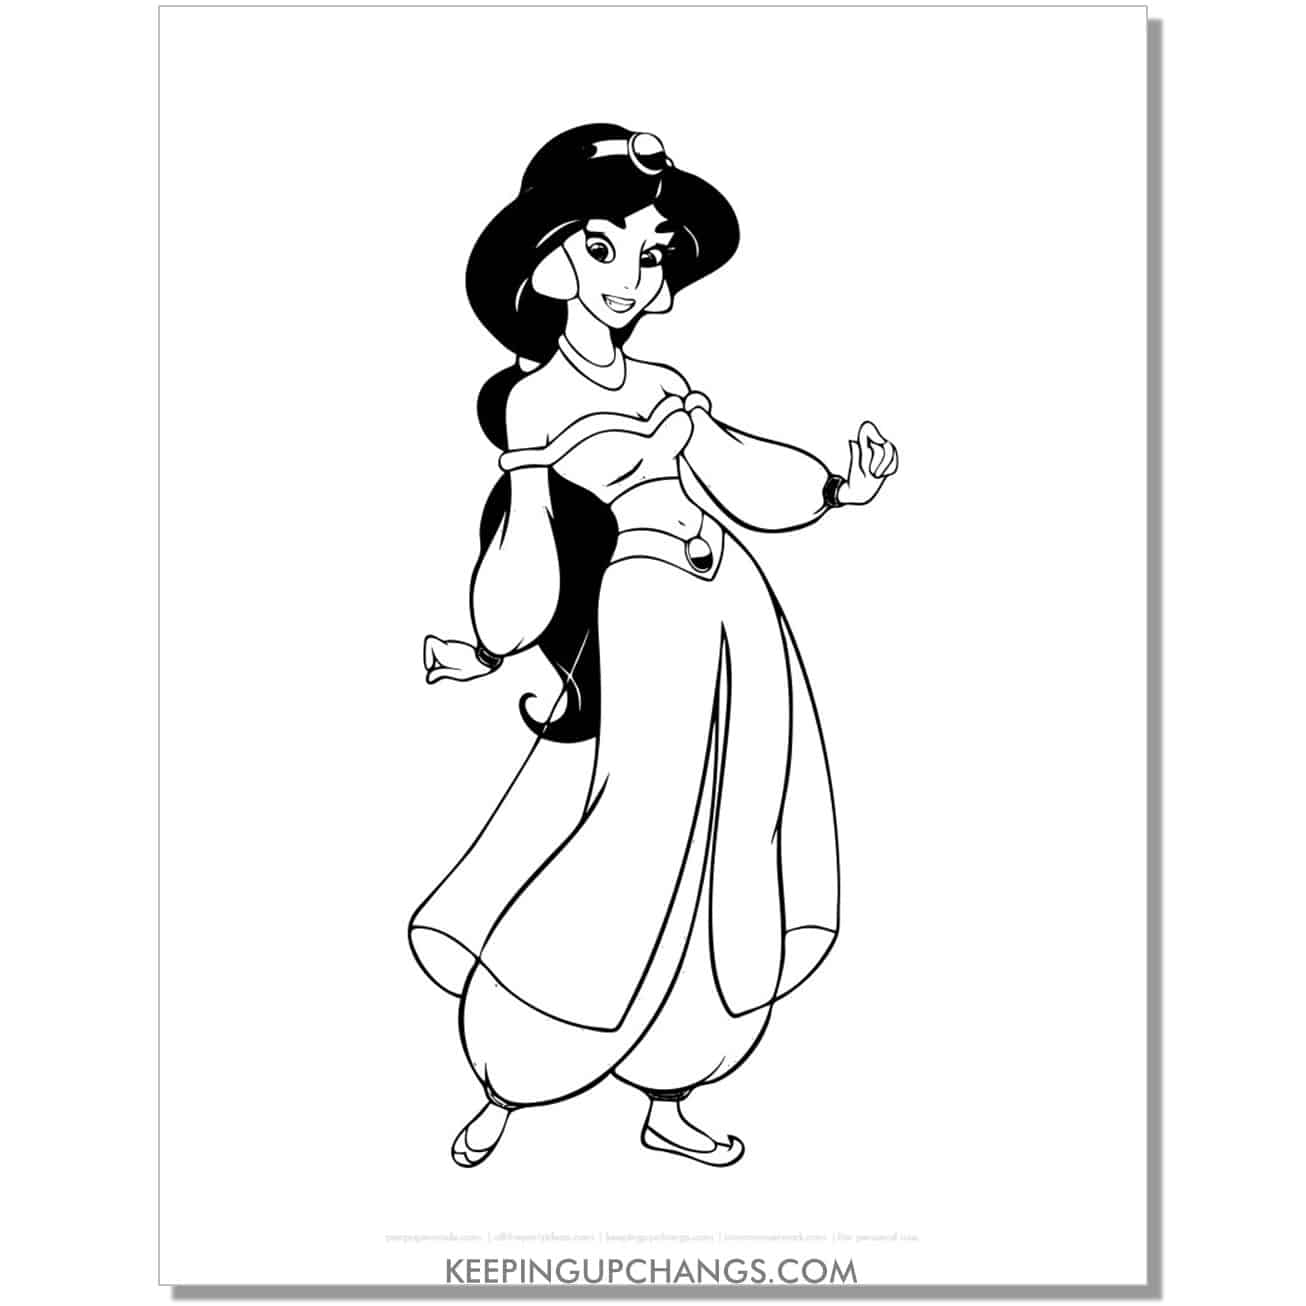 jasmine standing with foot to side coloring page, sheet.